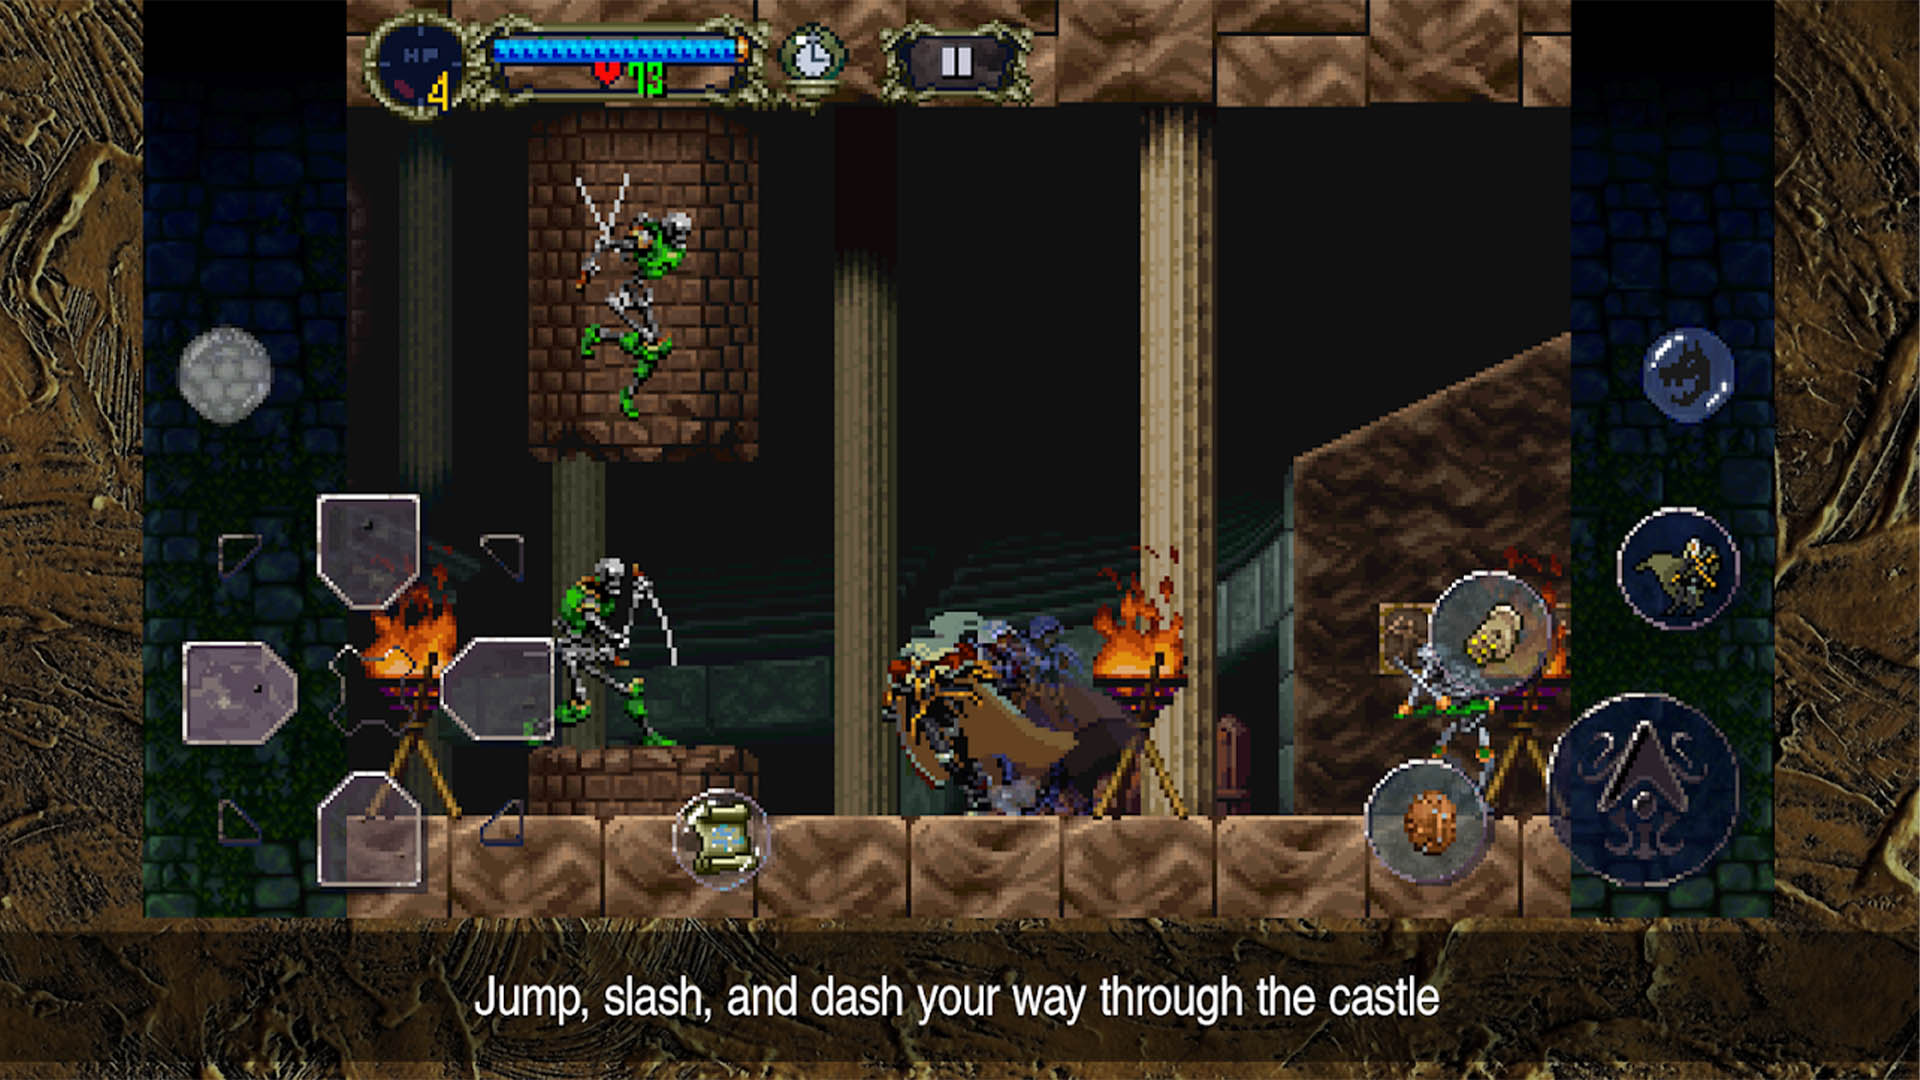 10 Best 2D CLASSIC RPG OPEN WORLD Games for Android & iOS